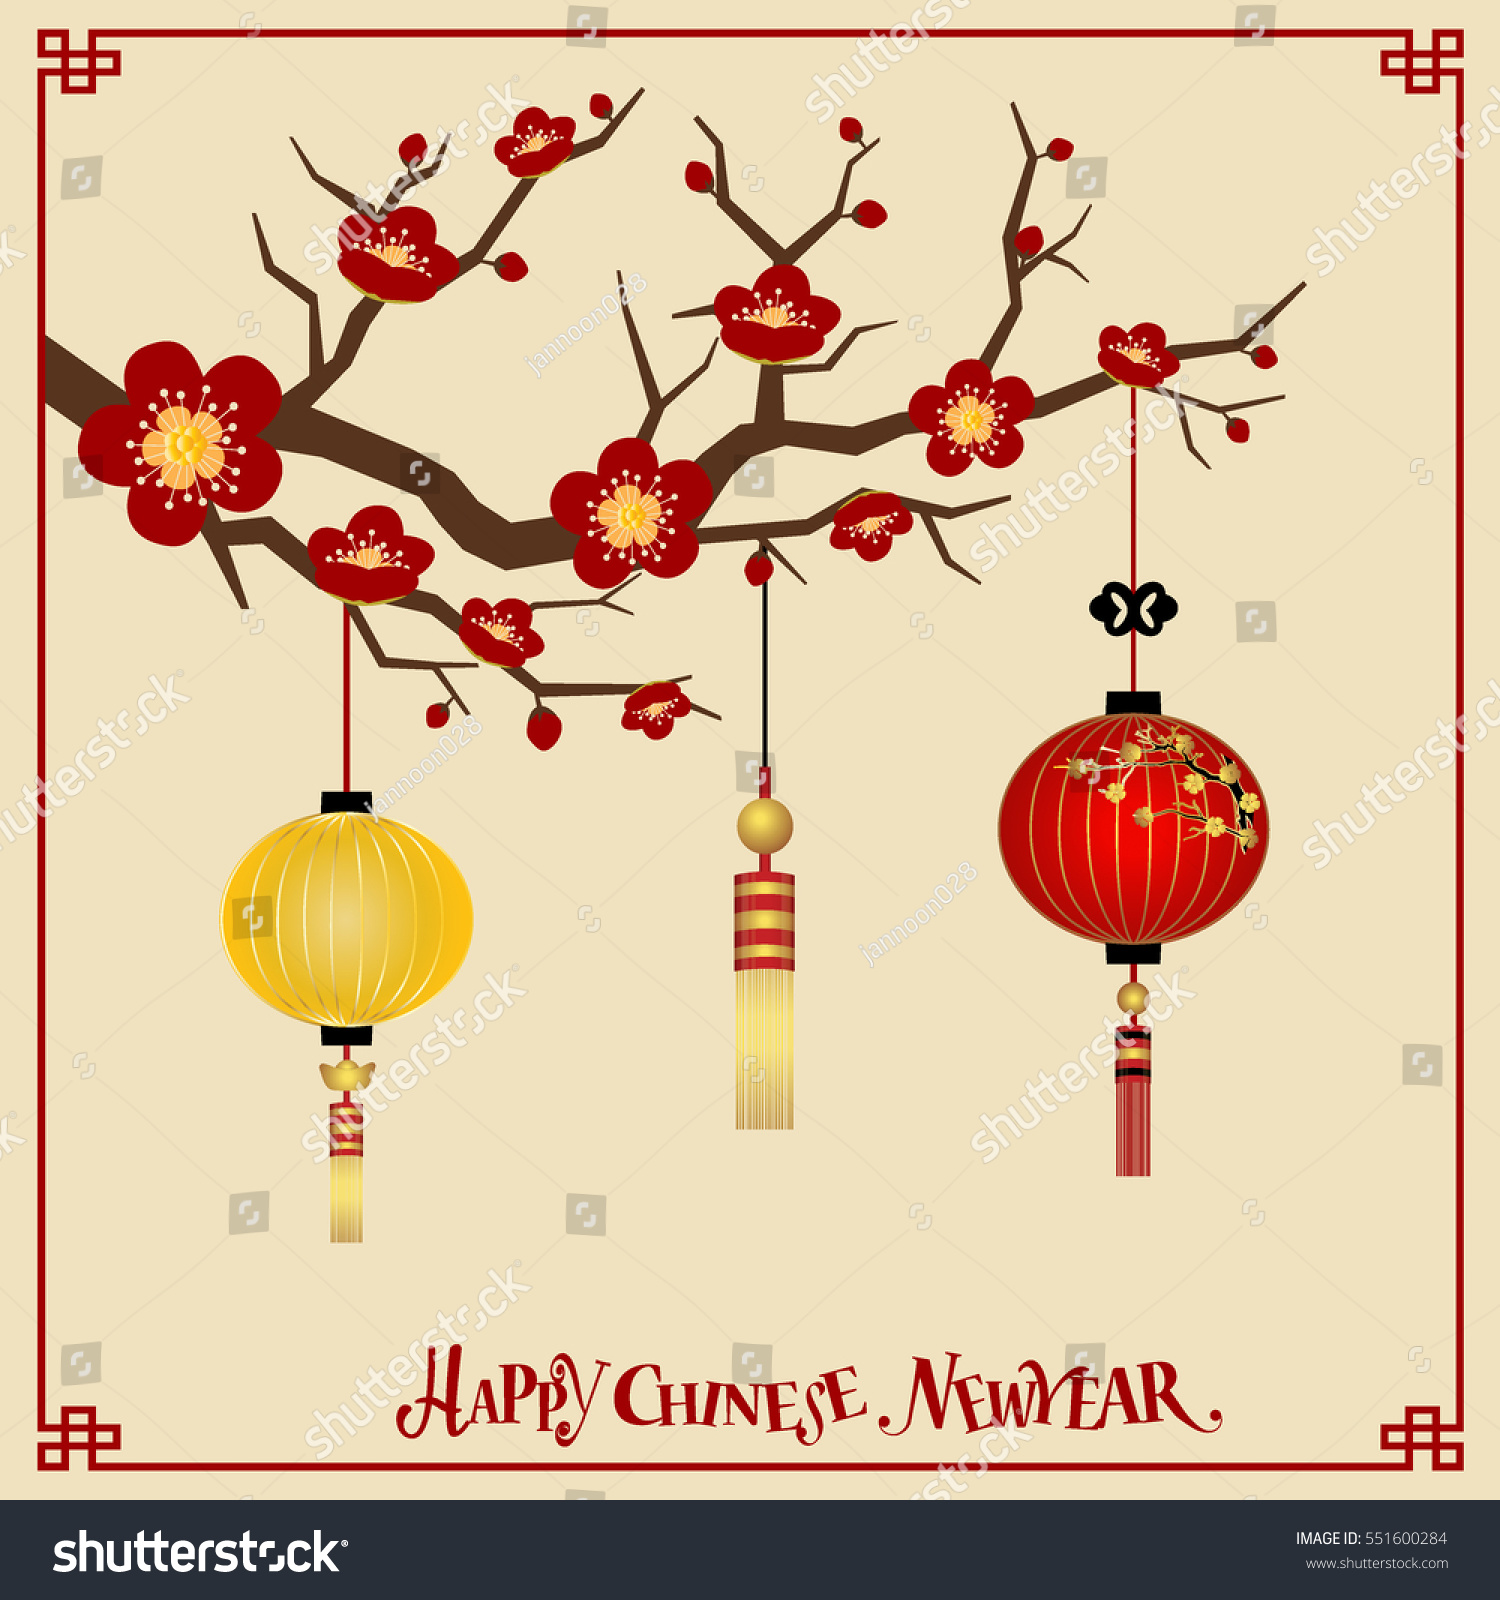 Chinese New Year Background Design Vector Stock Vector (Royalty Free